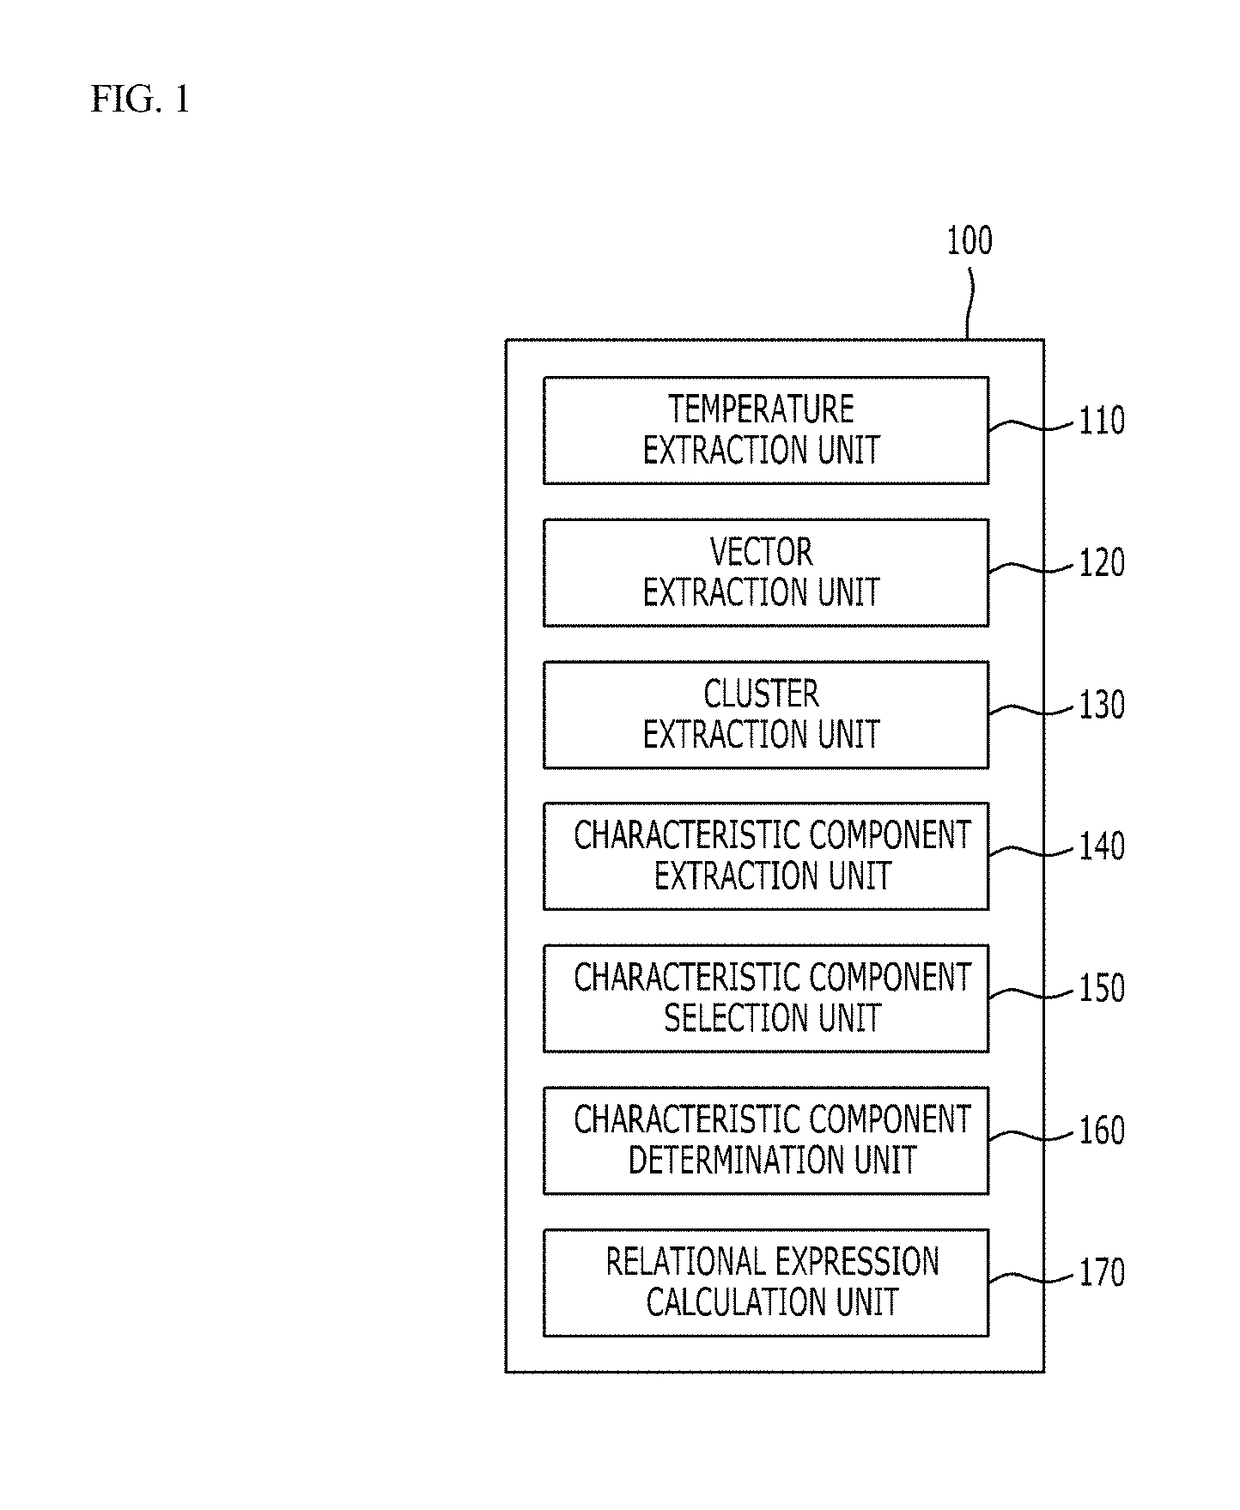 Influence analyzing apparatus for analyzing influence of combustibles